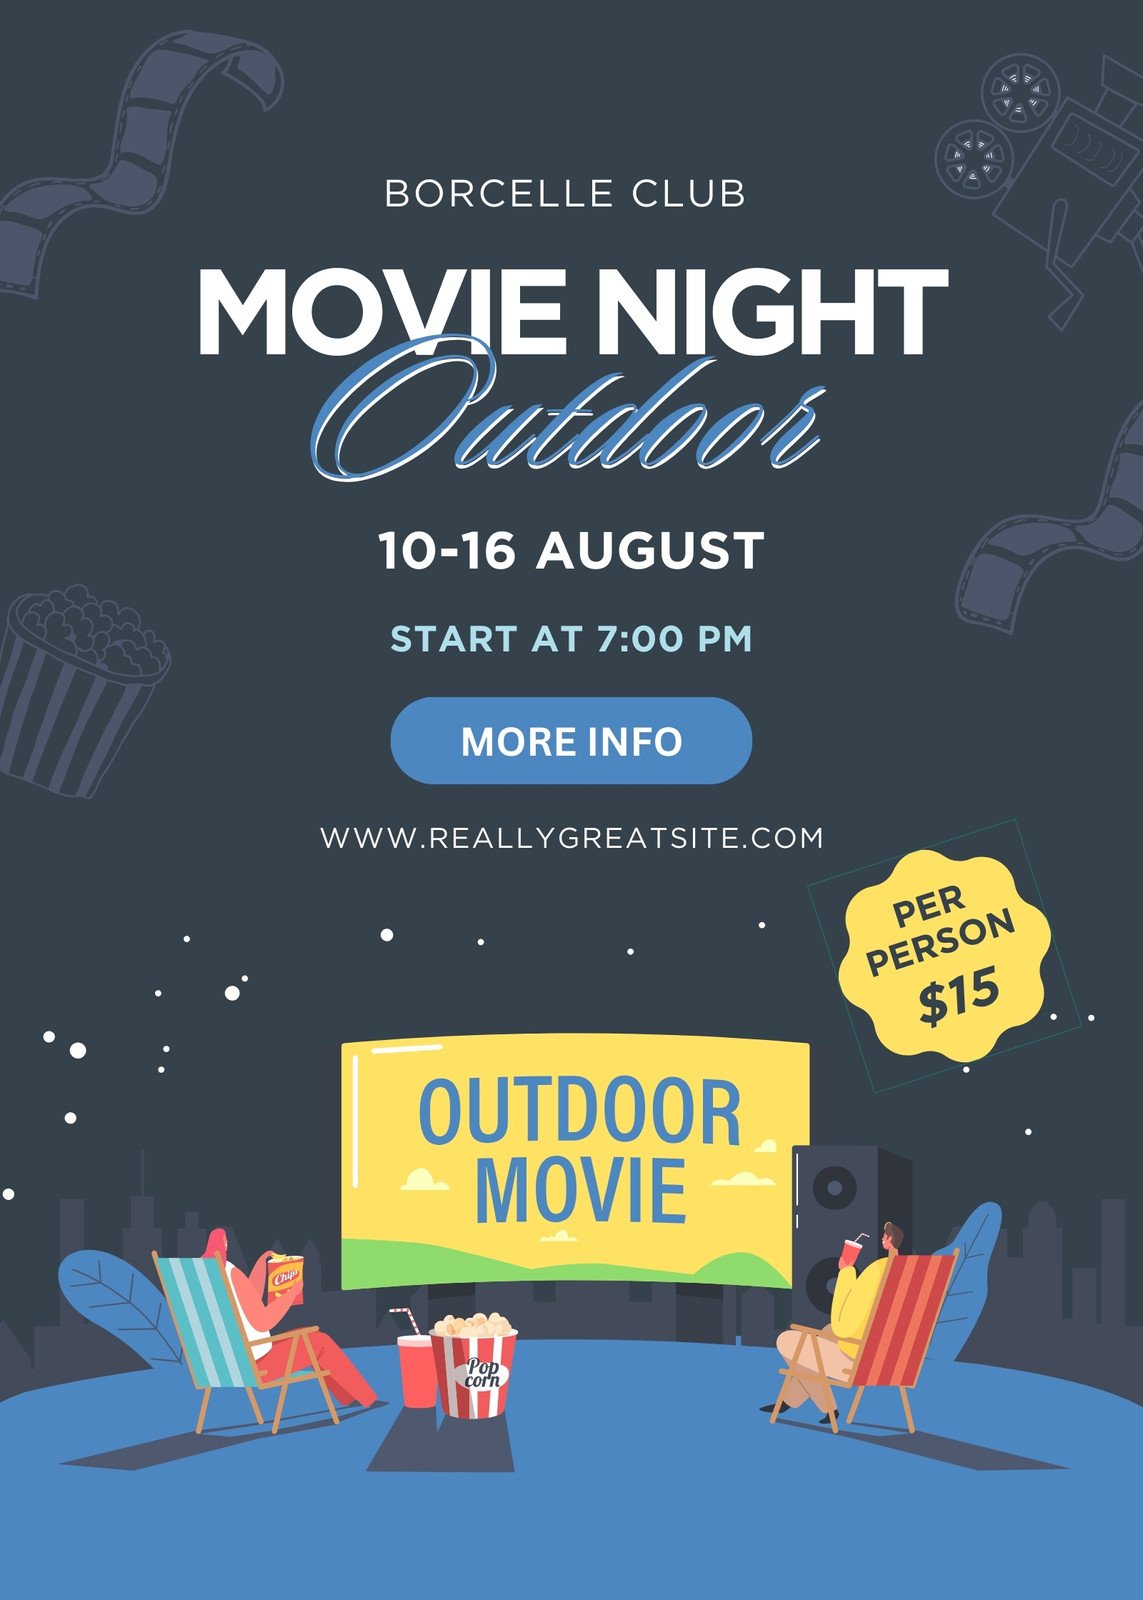 Black and Blue Illustrative Movie Night Outdoor Poster